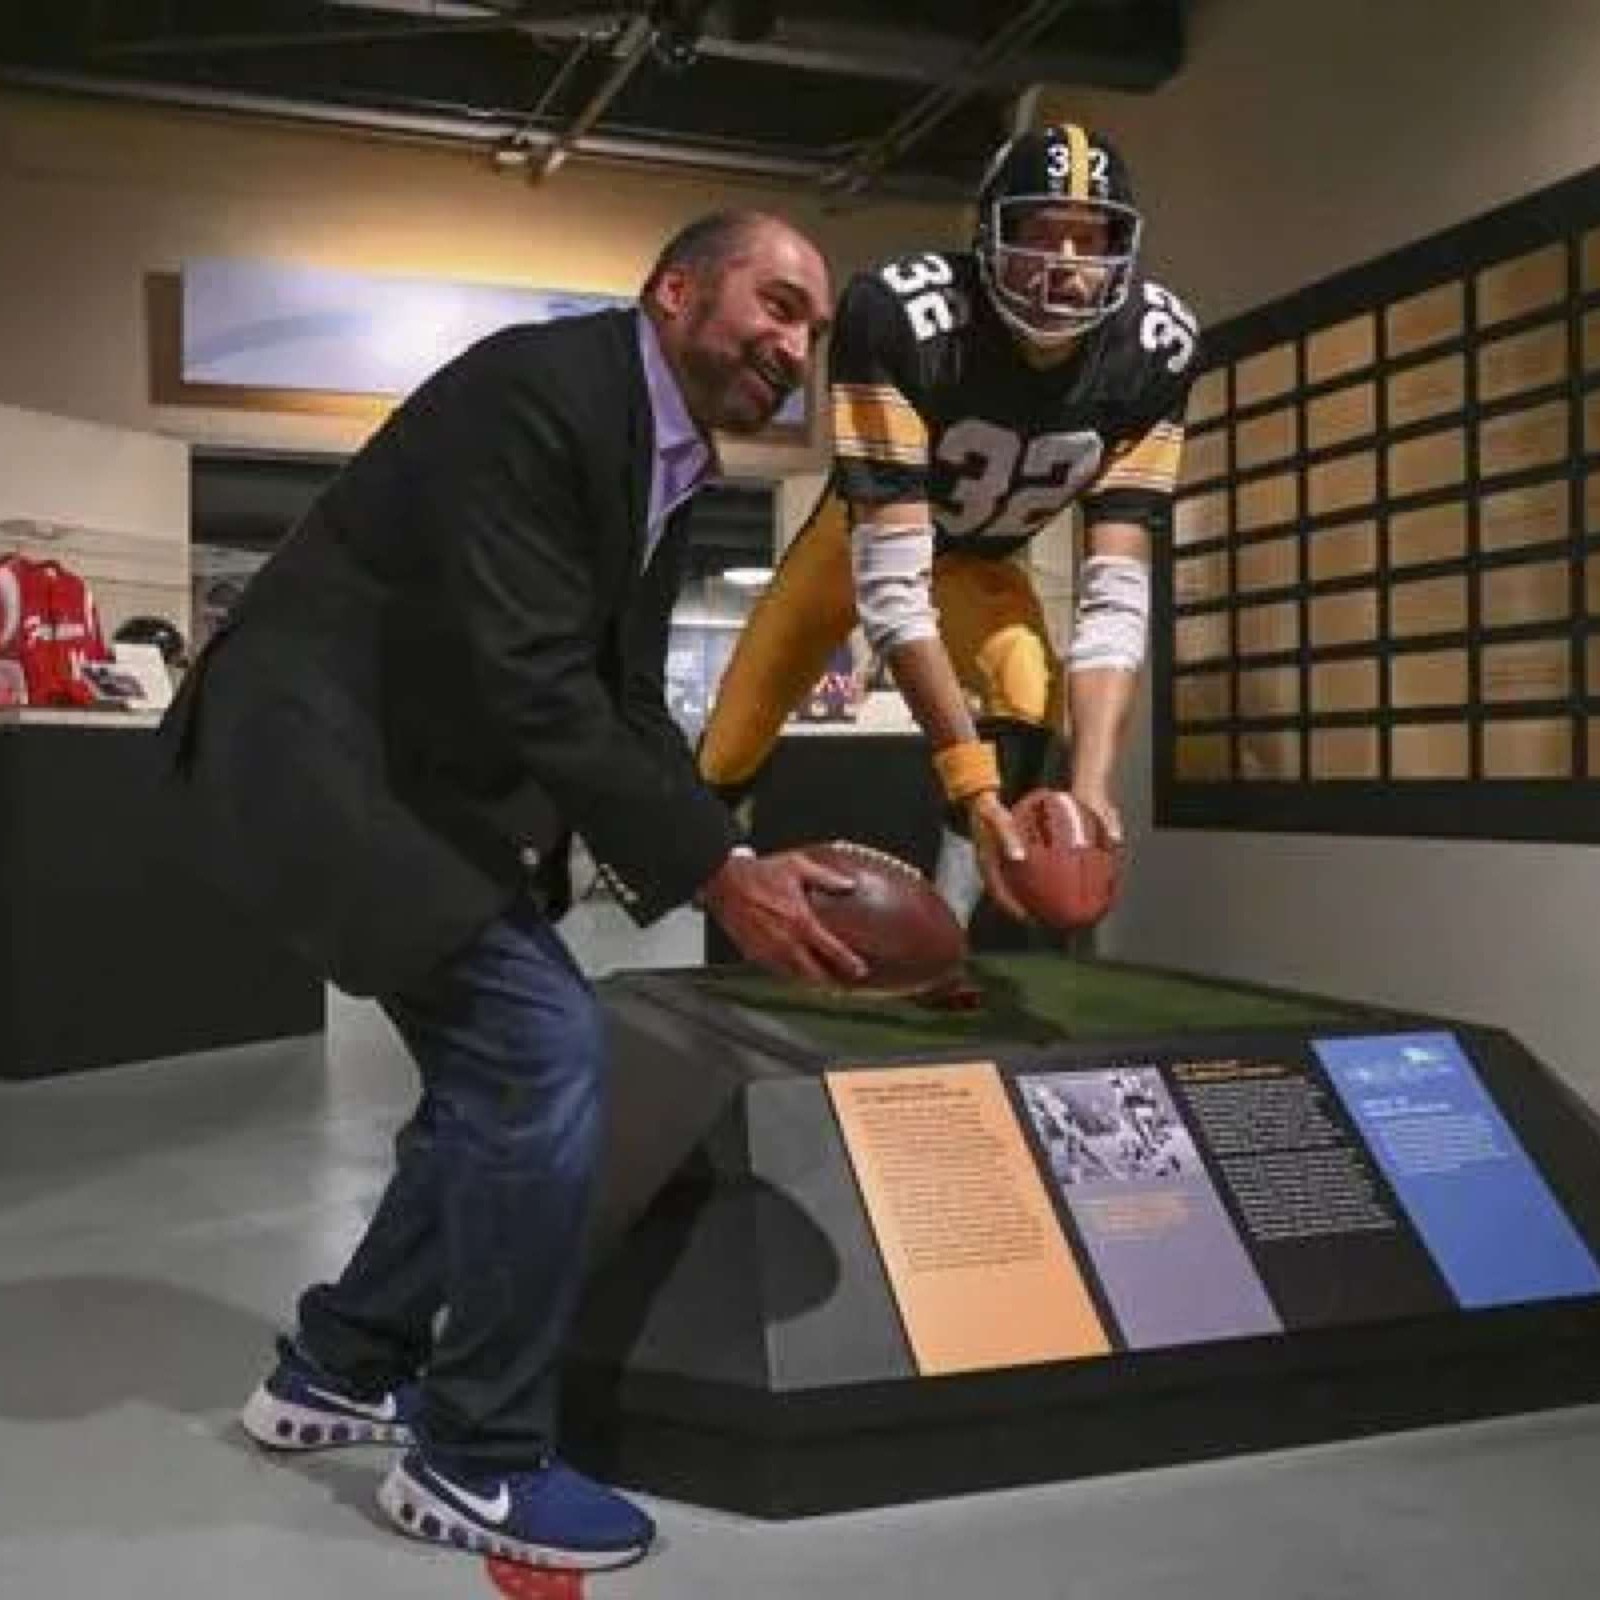 The Immaculate Reception Loses It's Hero